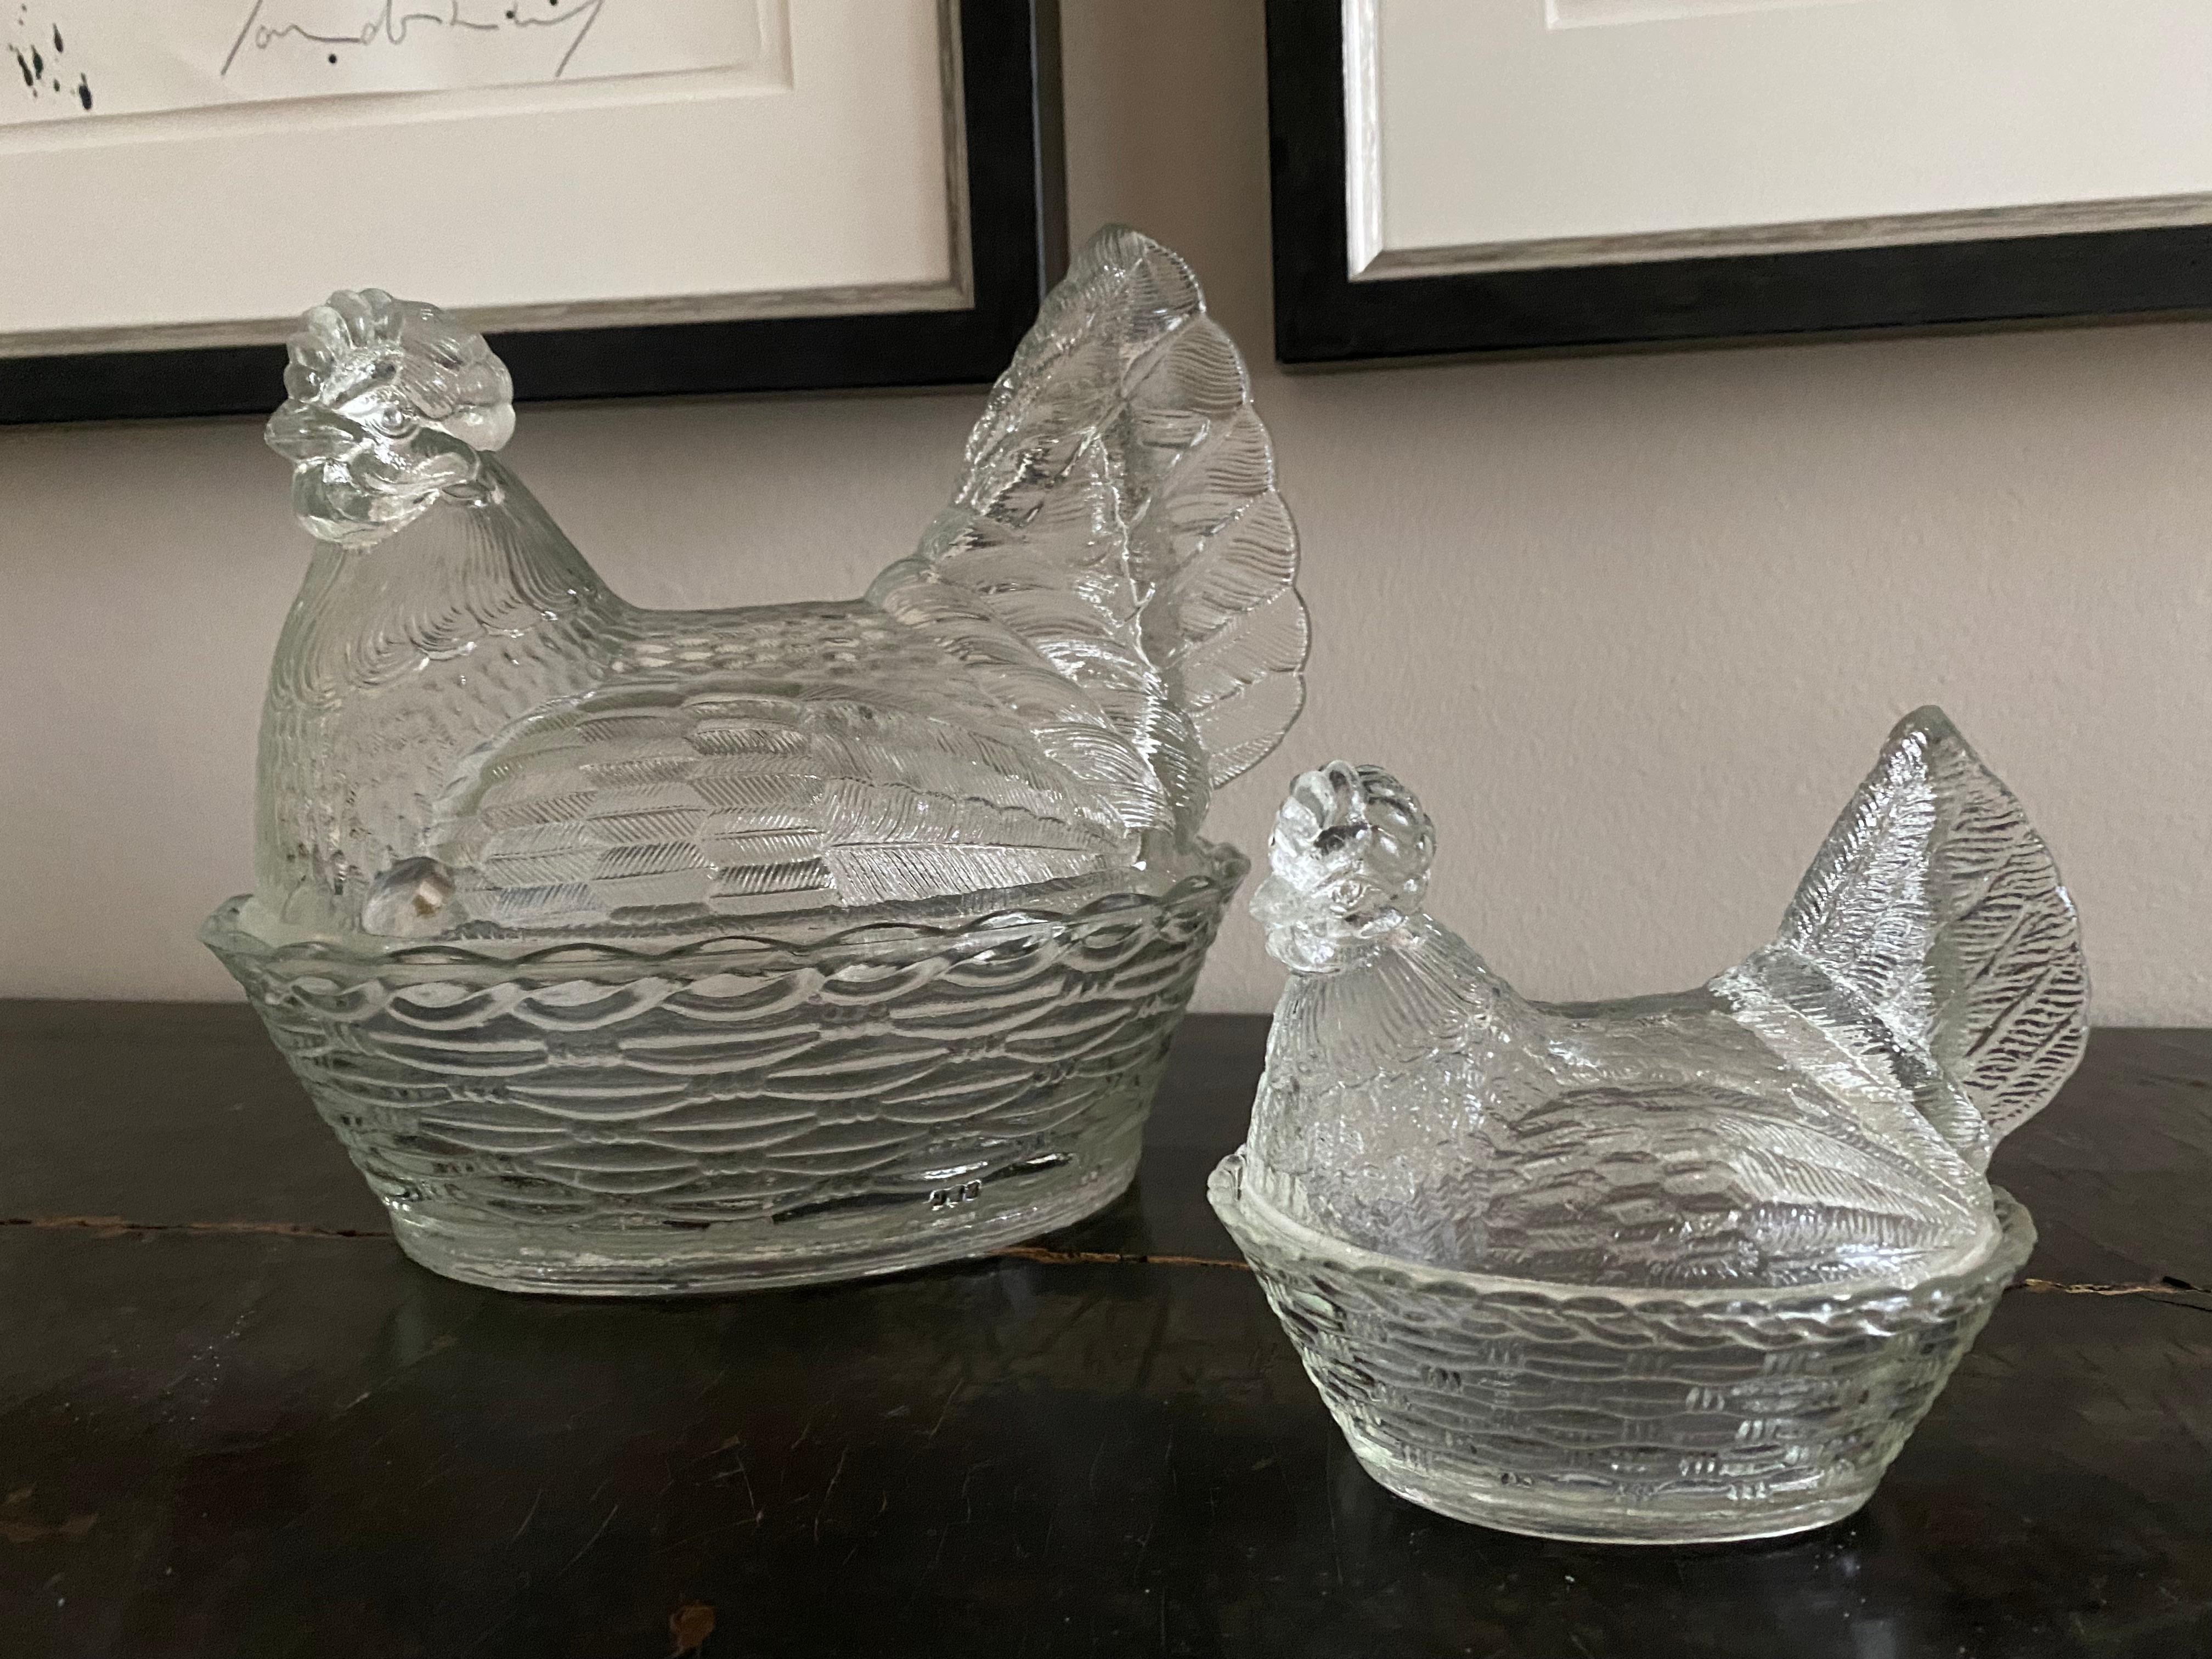 A pair of lidded cans/bonbonniere made of pressed glass, hens in a basket
These lidded cans are a French classic. The tins are made of pressed glass, finely written with clean sharp edges. You can store sweets and biscuits in it or use the small